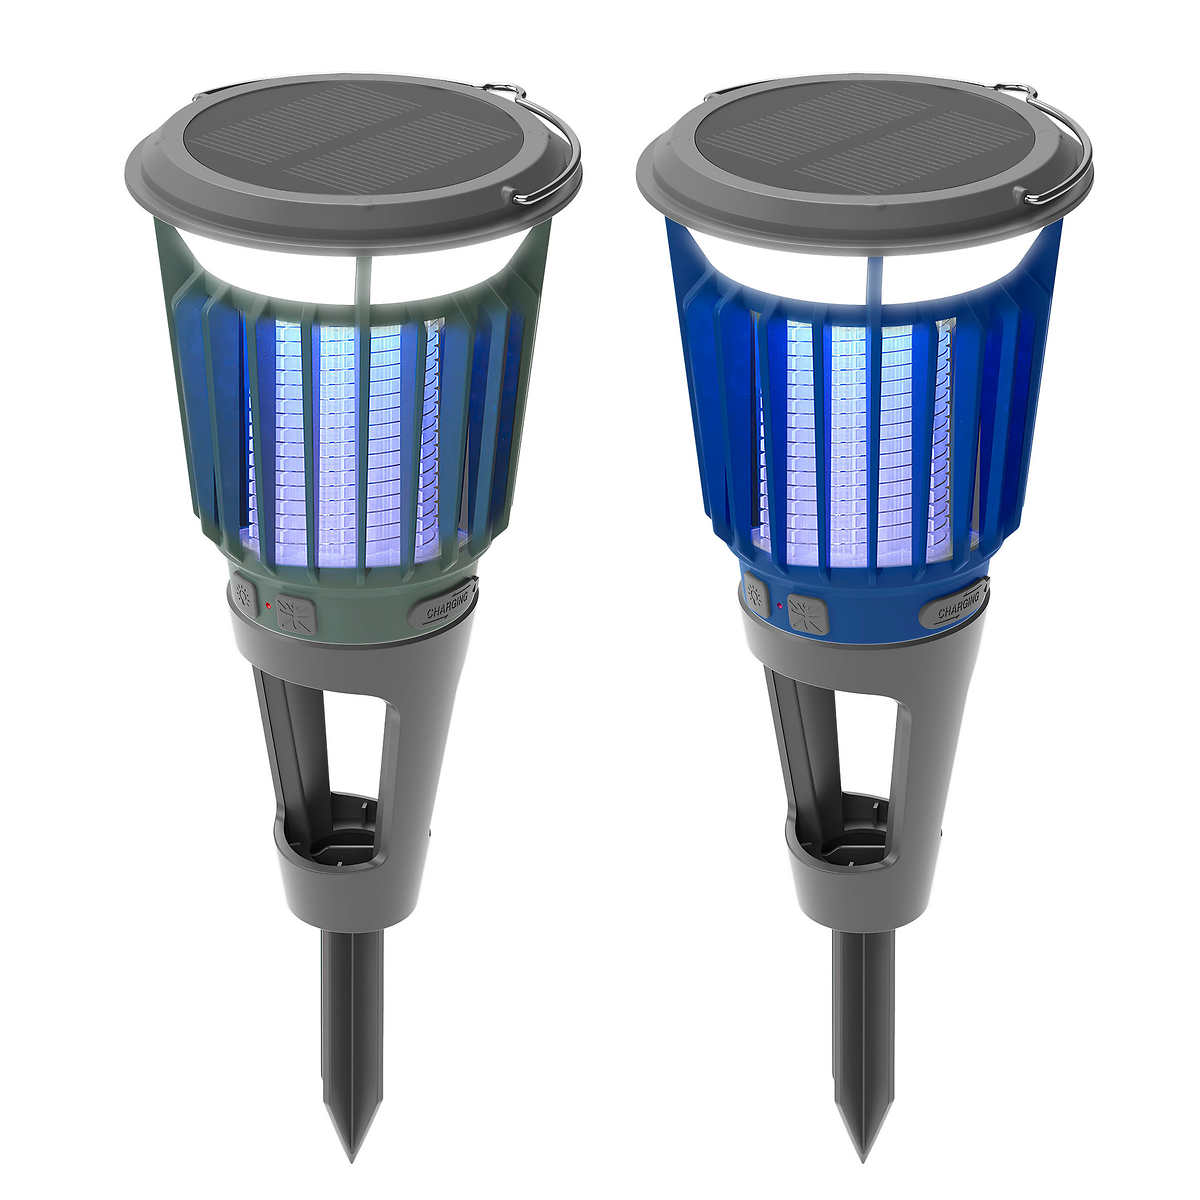 Wisely Solar Bug Zapper Lantern, 2-pack� | Costco $29.99